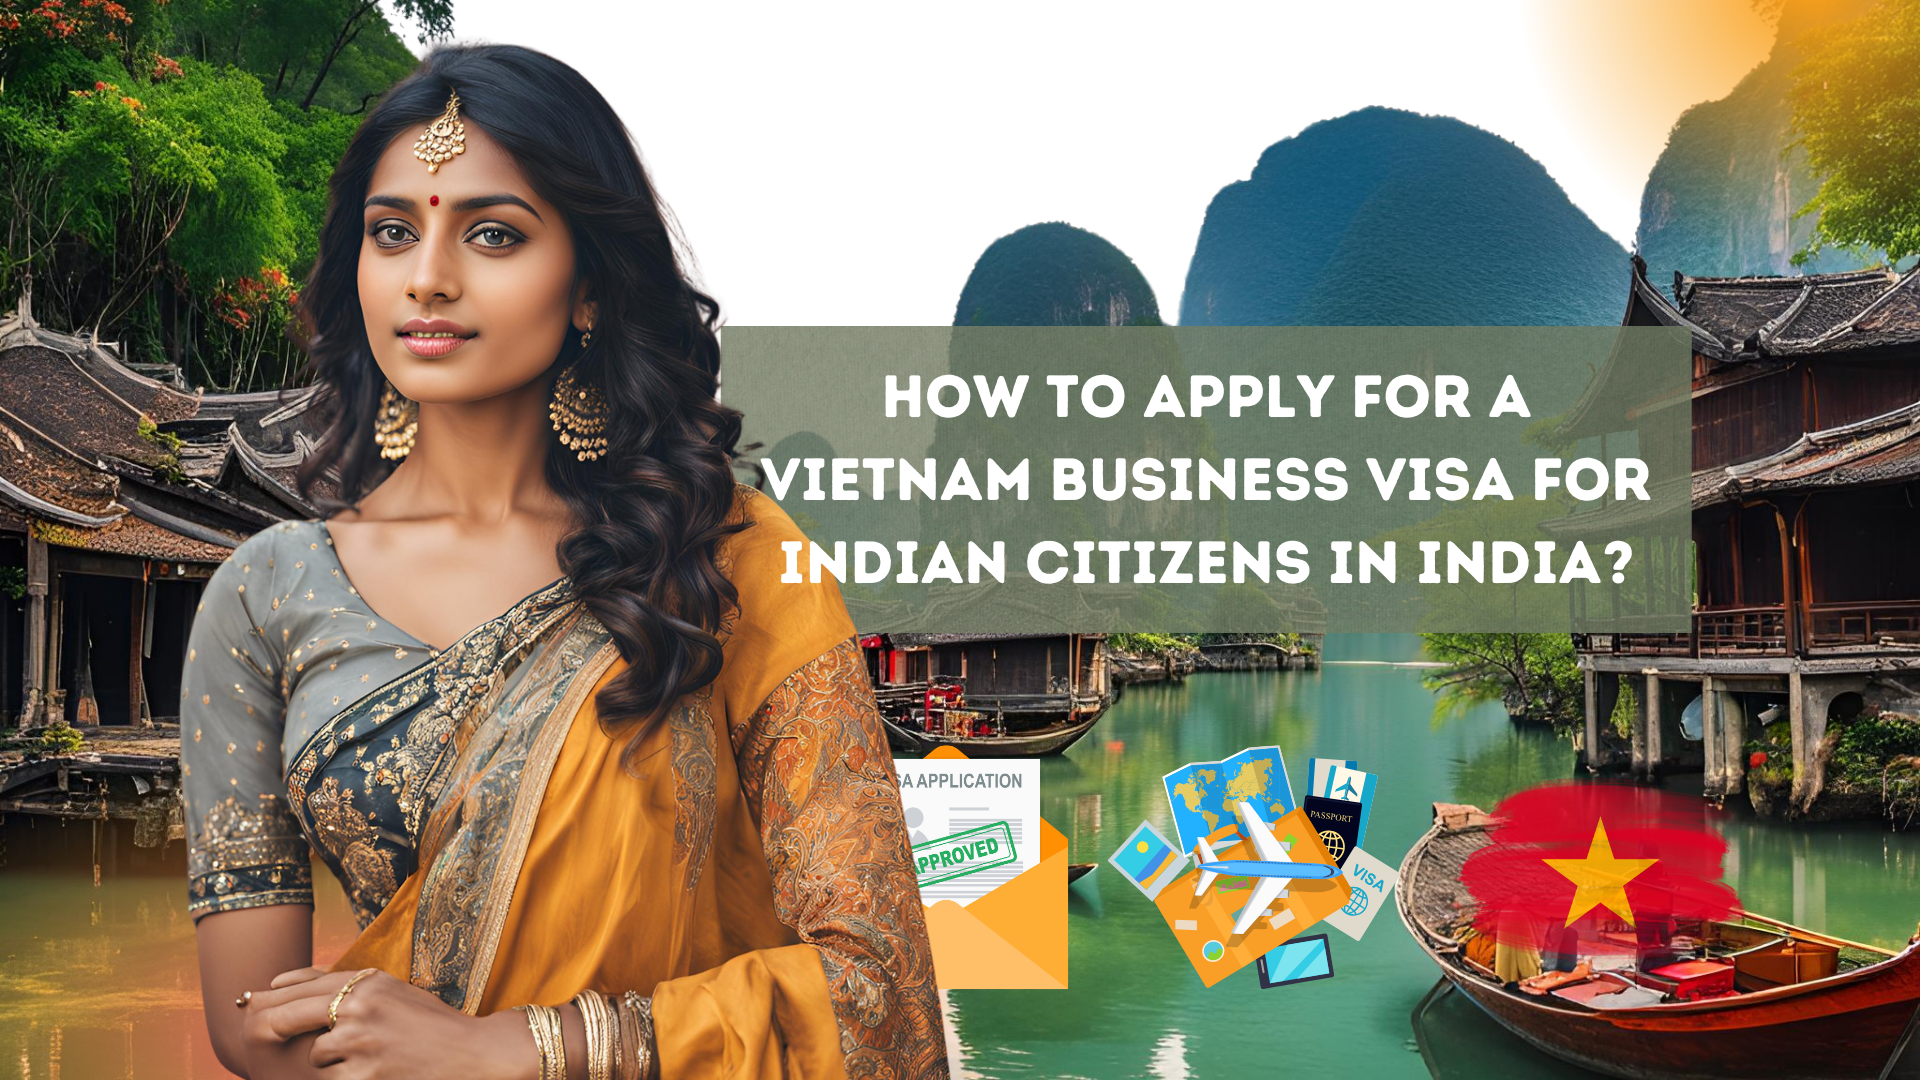 How to apply for a Vietnam business visa for Indian citizens in India?